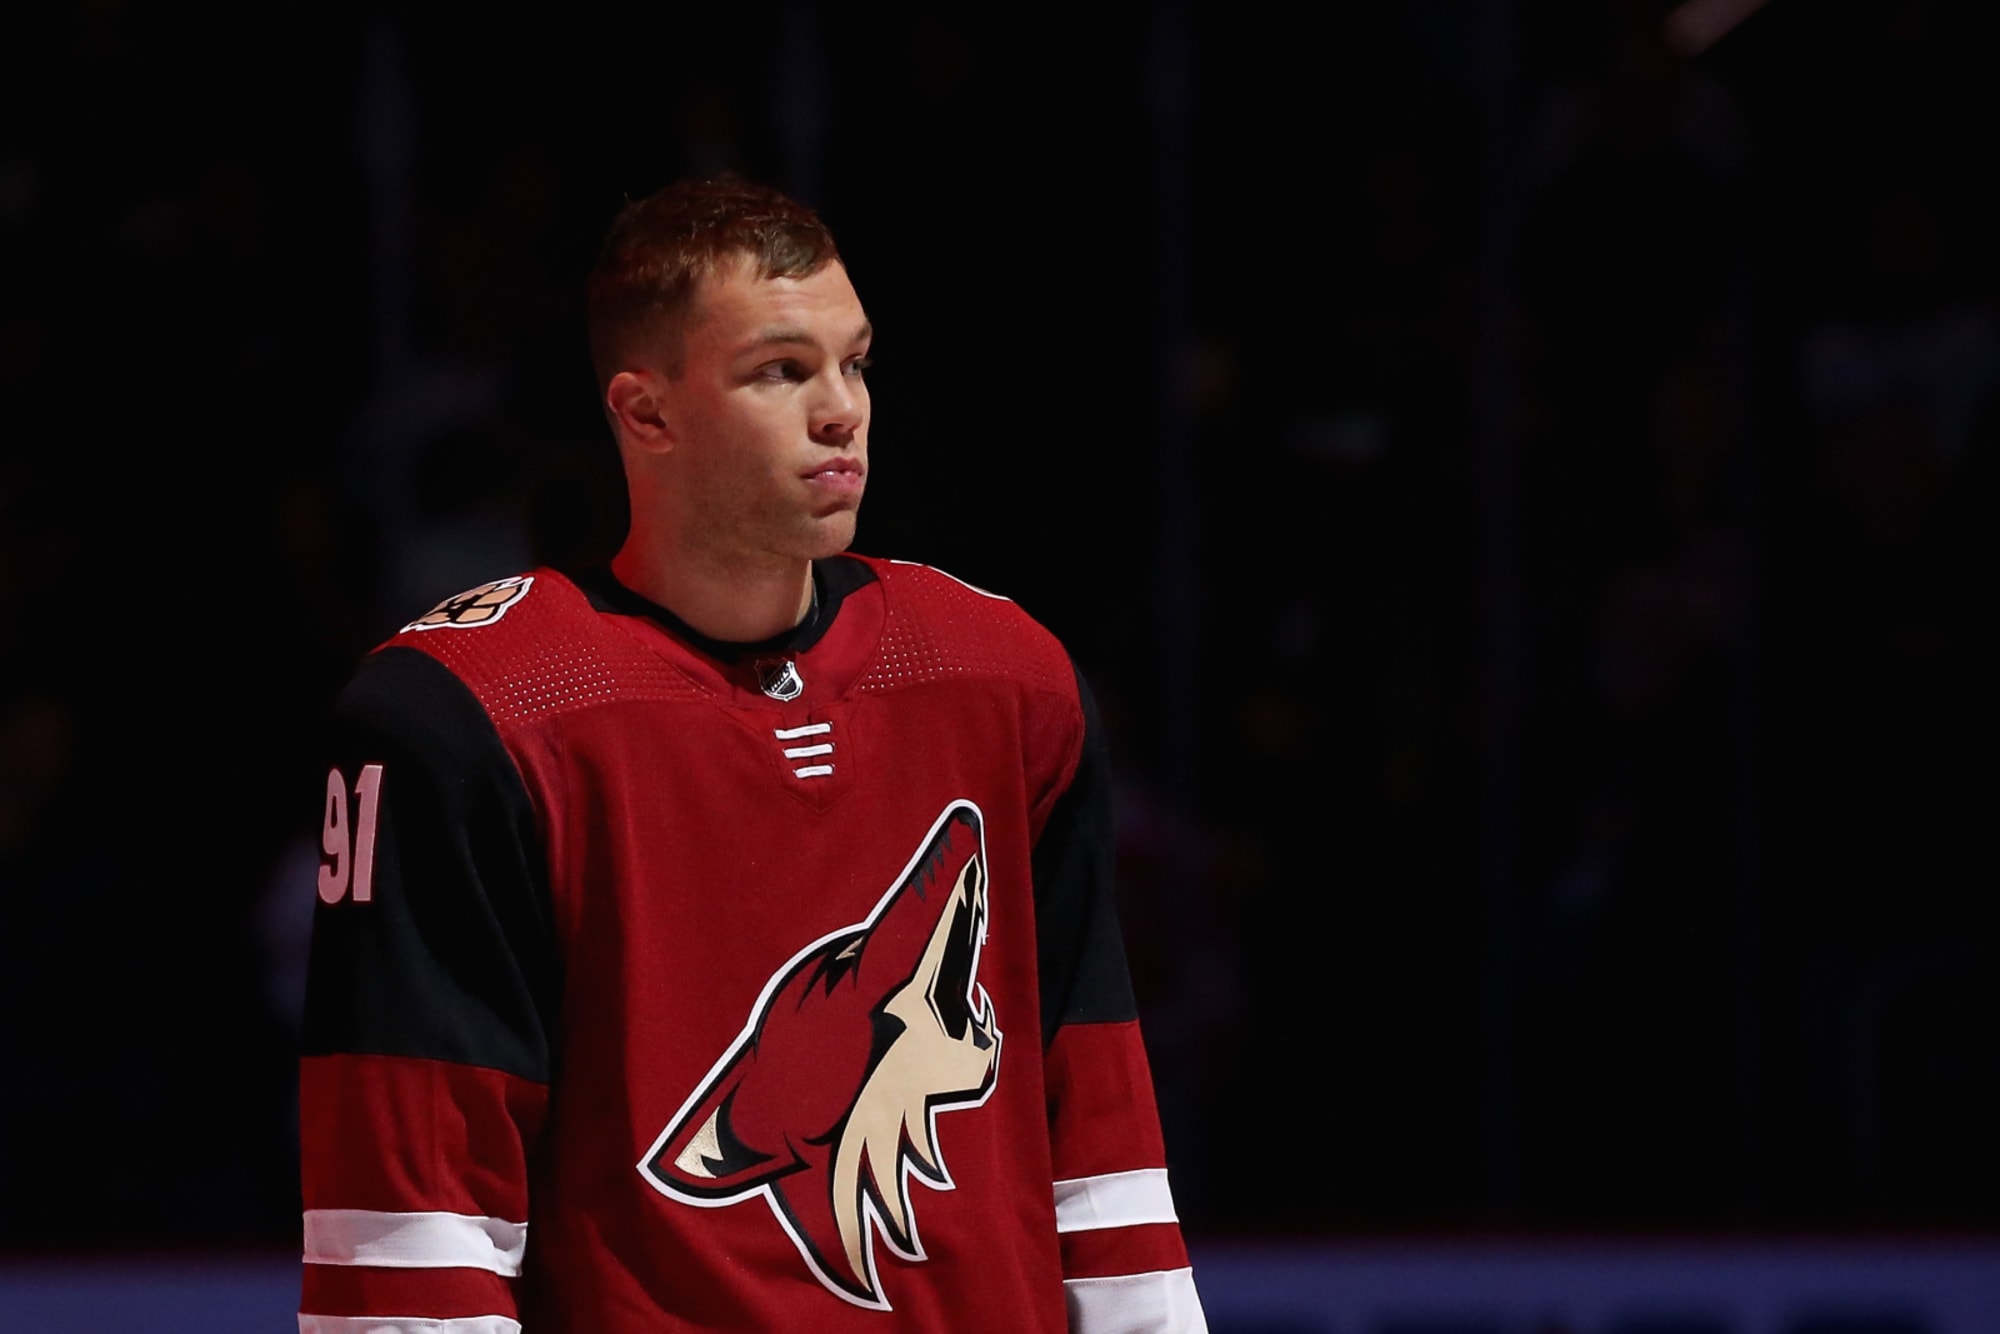 Report: Coyotes making 'serious effort' in potential Taylor Hall trade